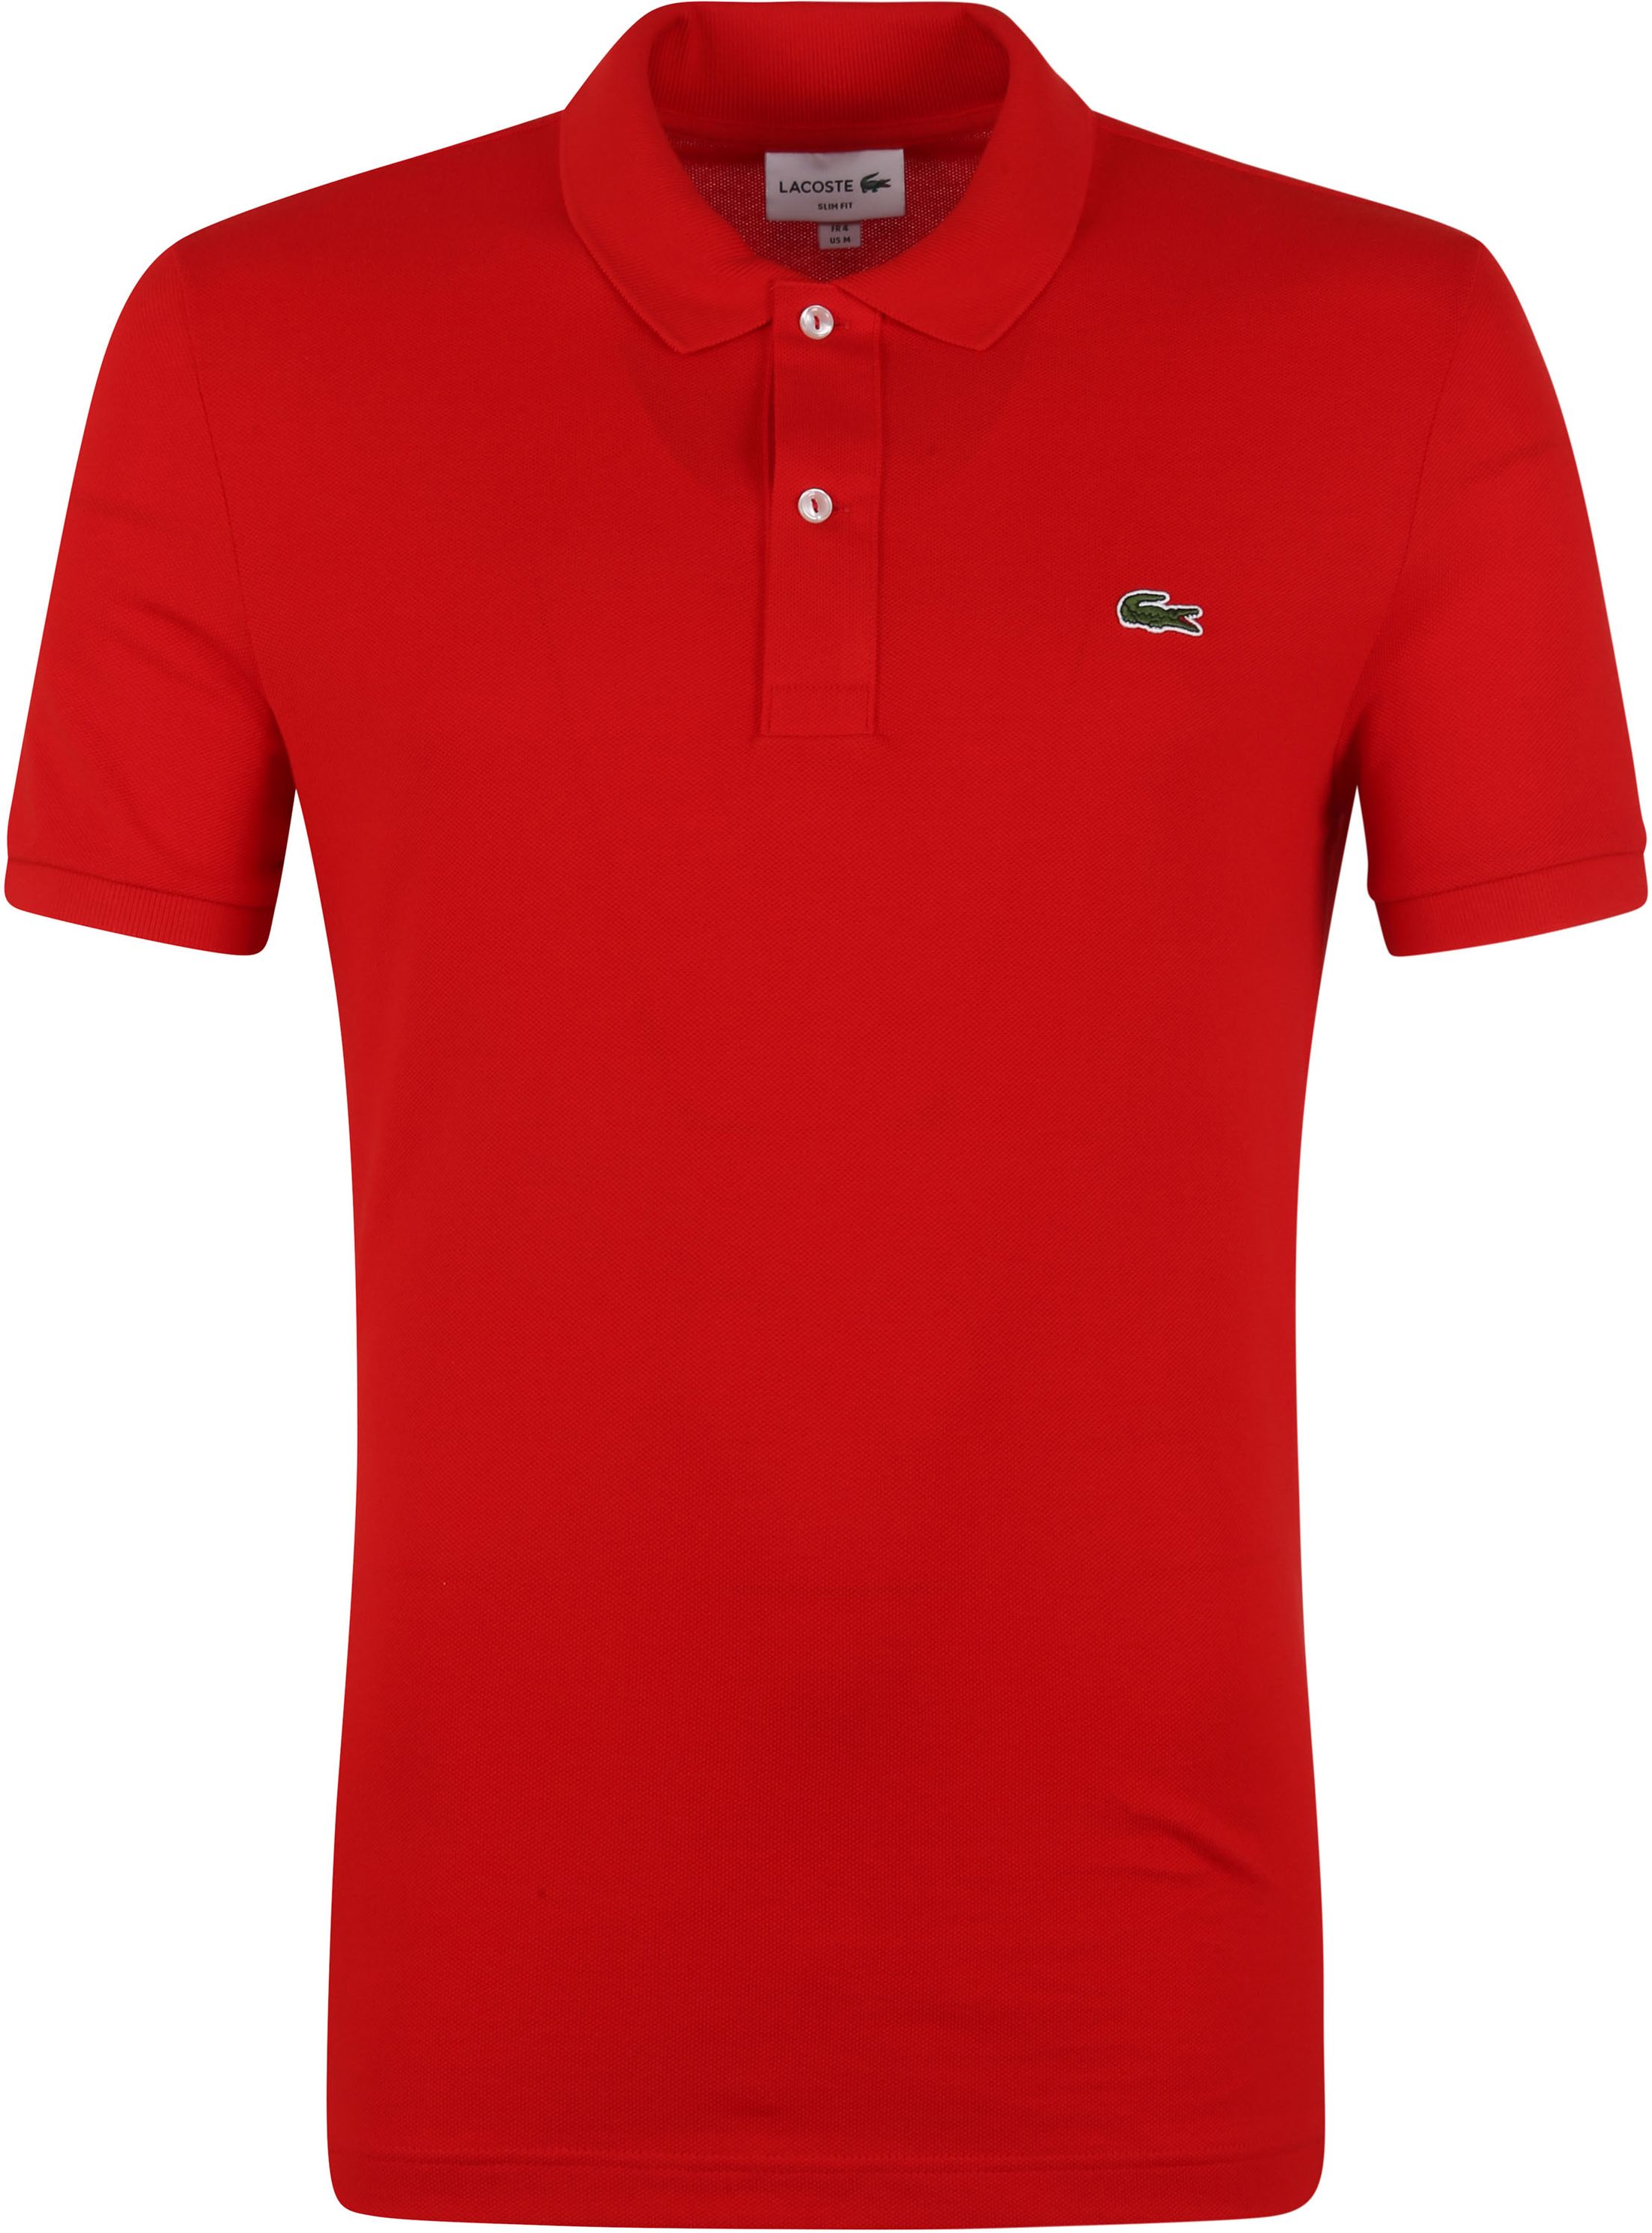 Lacoste Polo Shirt Pique Red size L